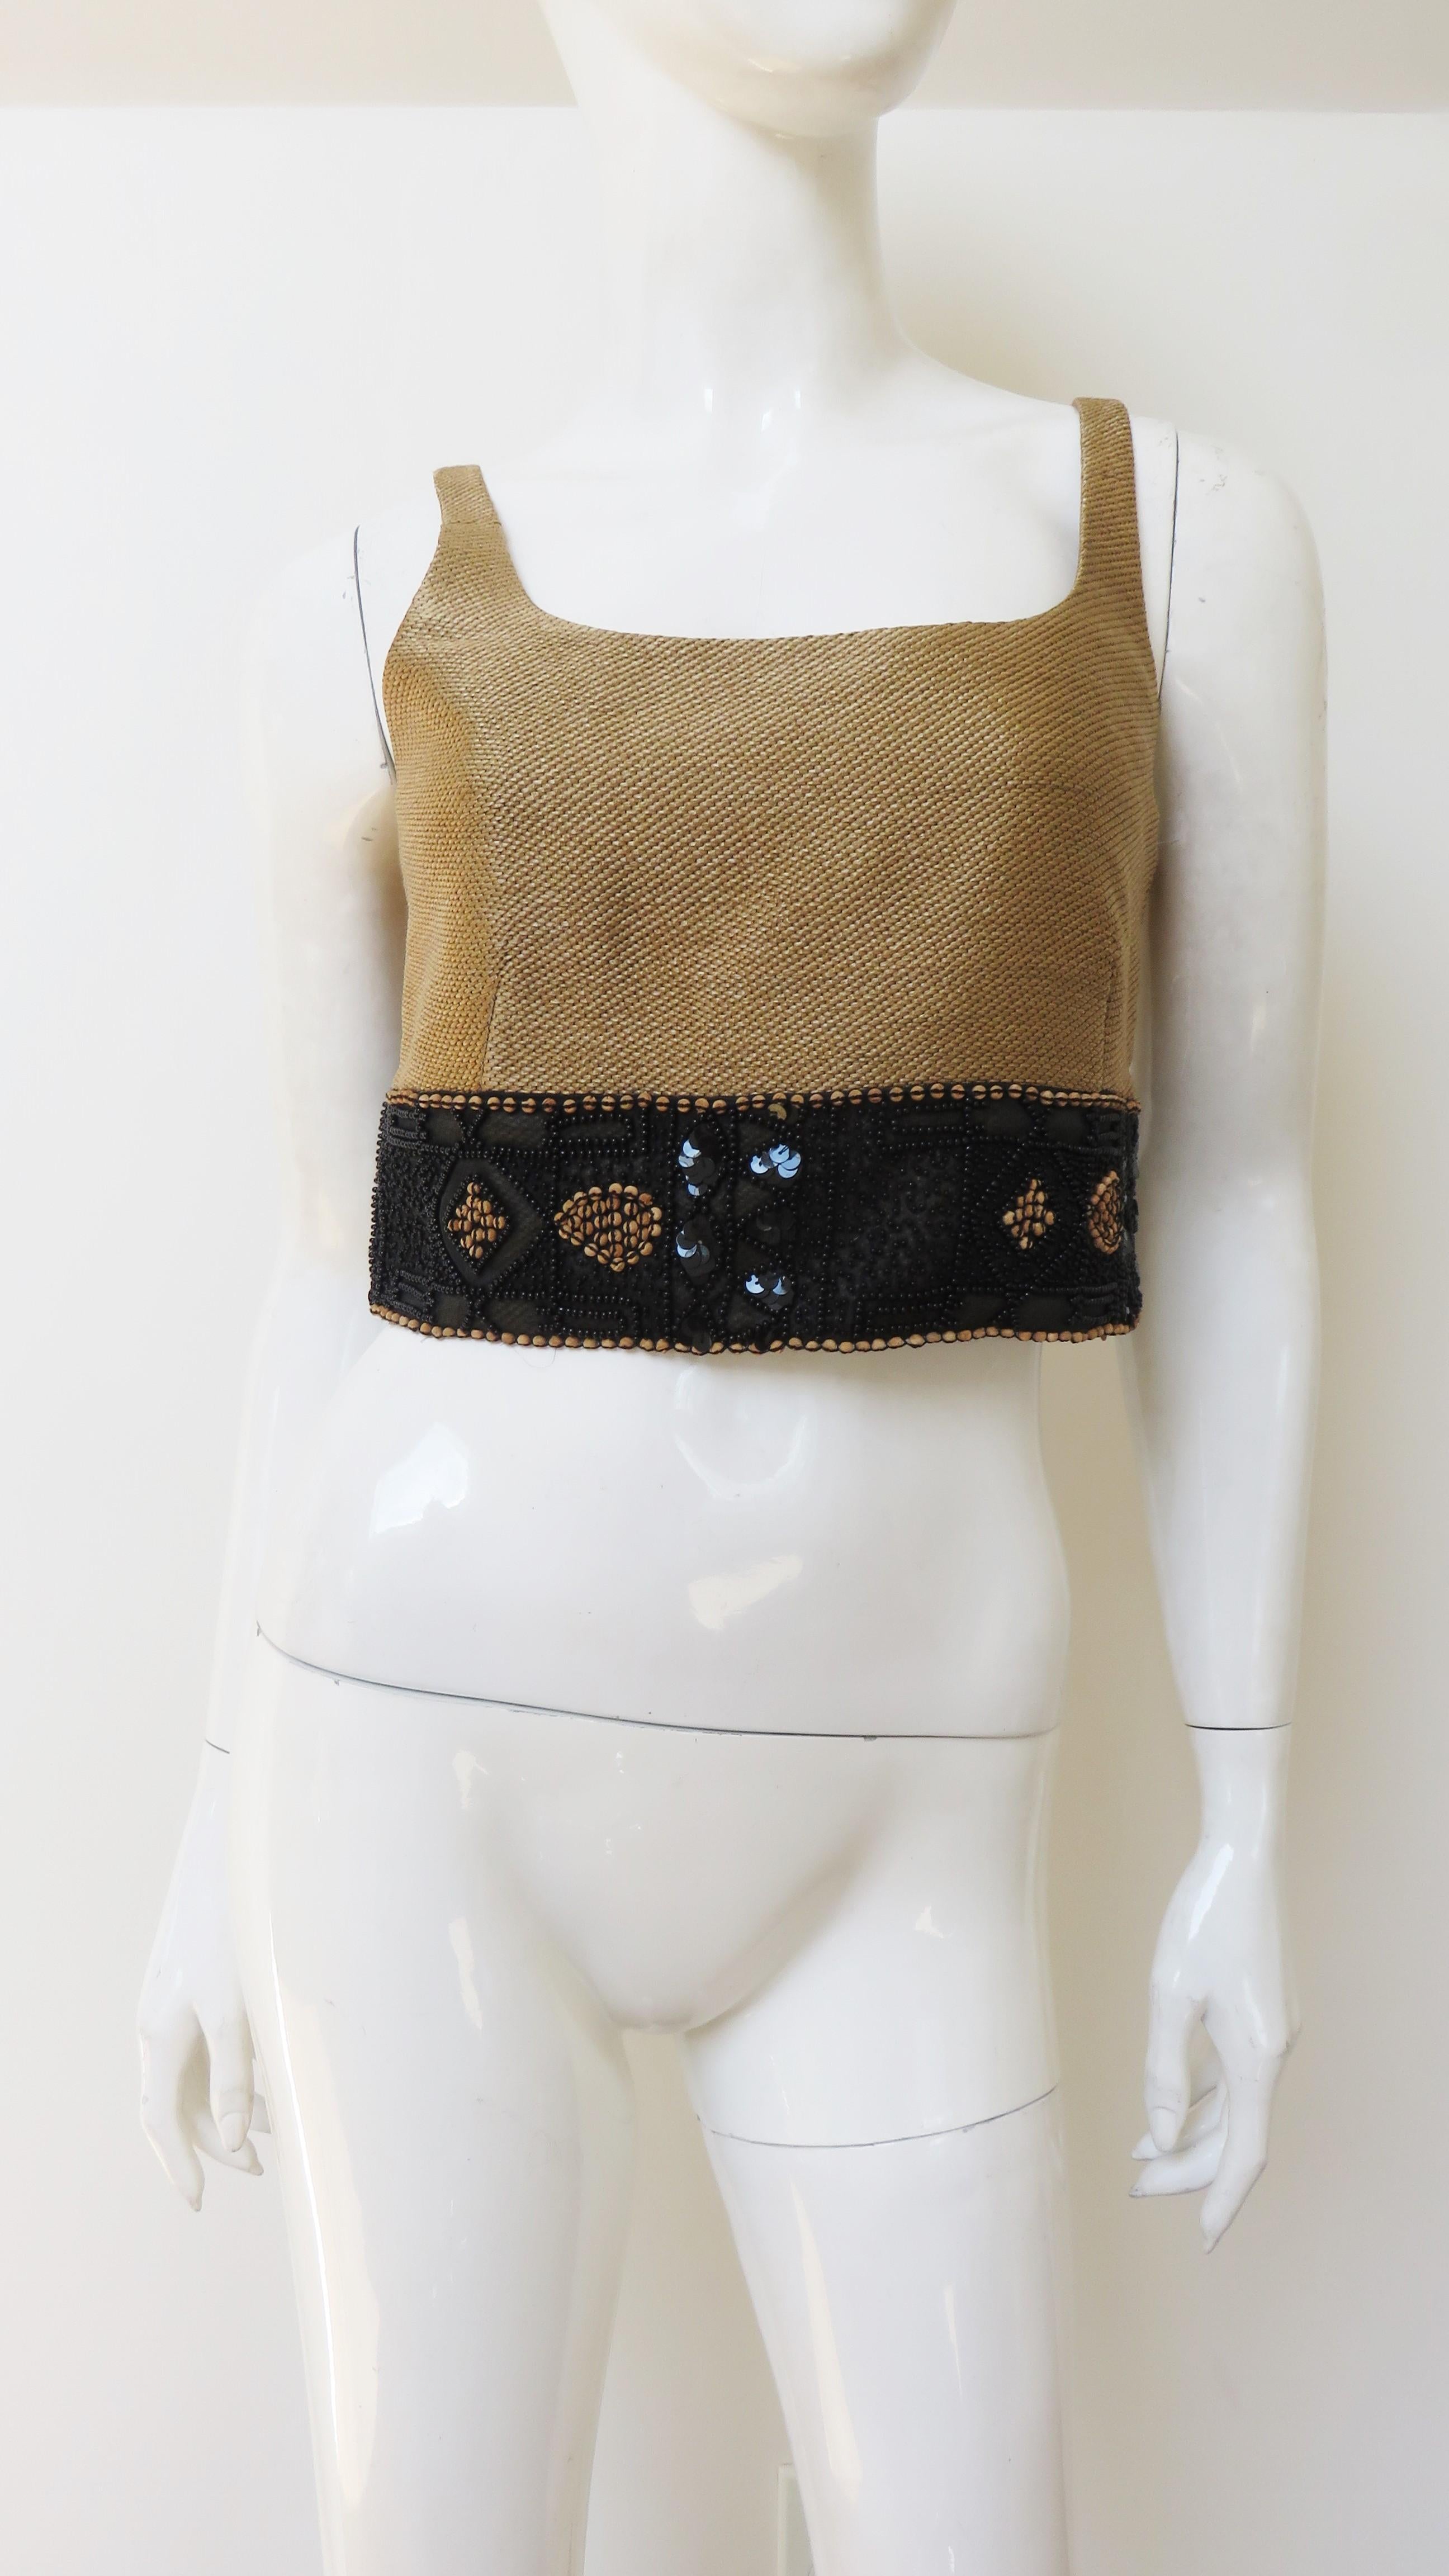 A fabulous tan scoop neck crop top with a black elaborately glass beaded band around the bottom from Douglas Anderson.  It is fully lined and has a side zipper.
New without tags.  Marked US size 8.

Bust  17